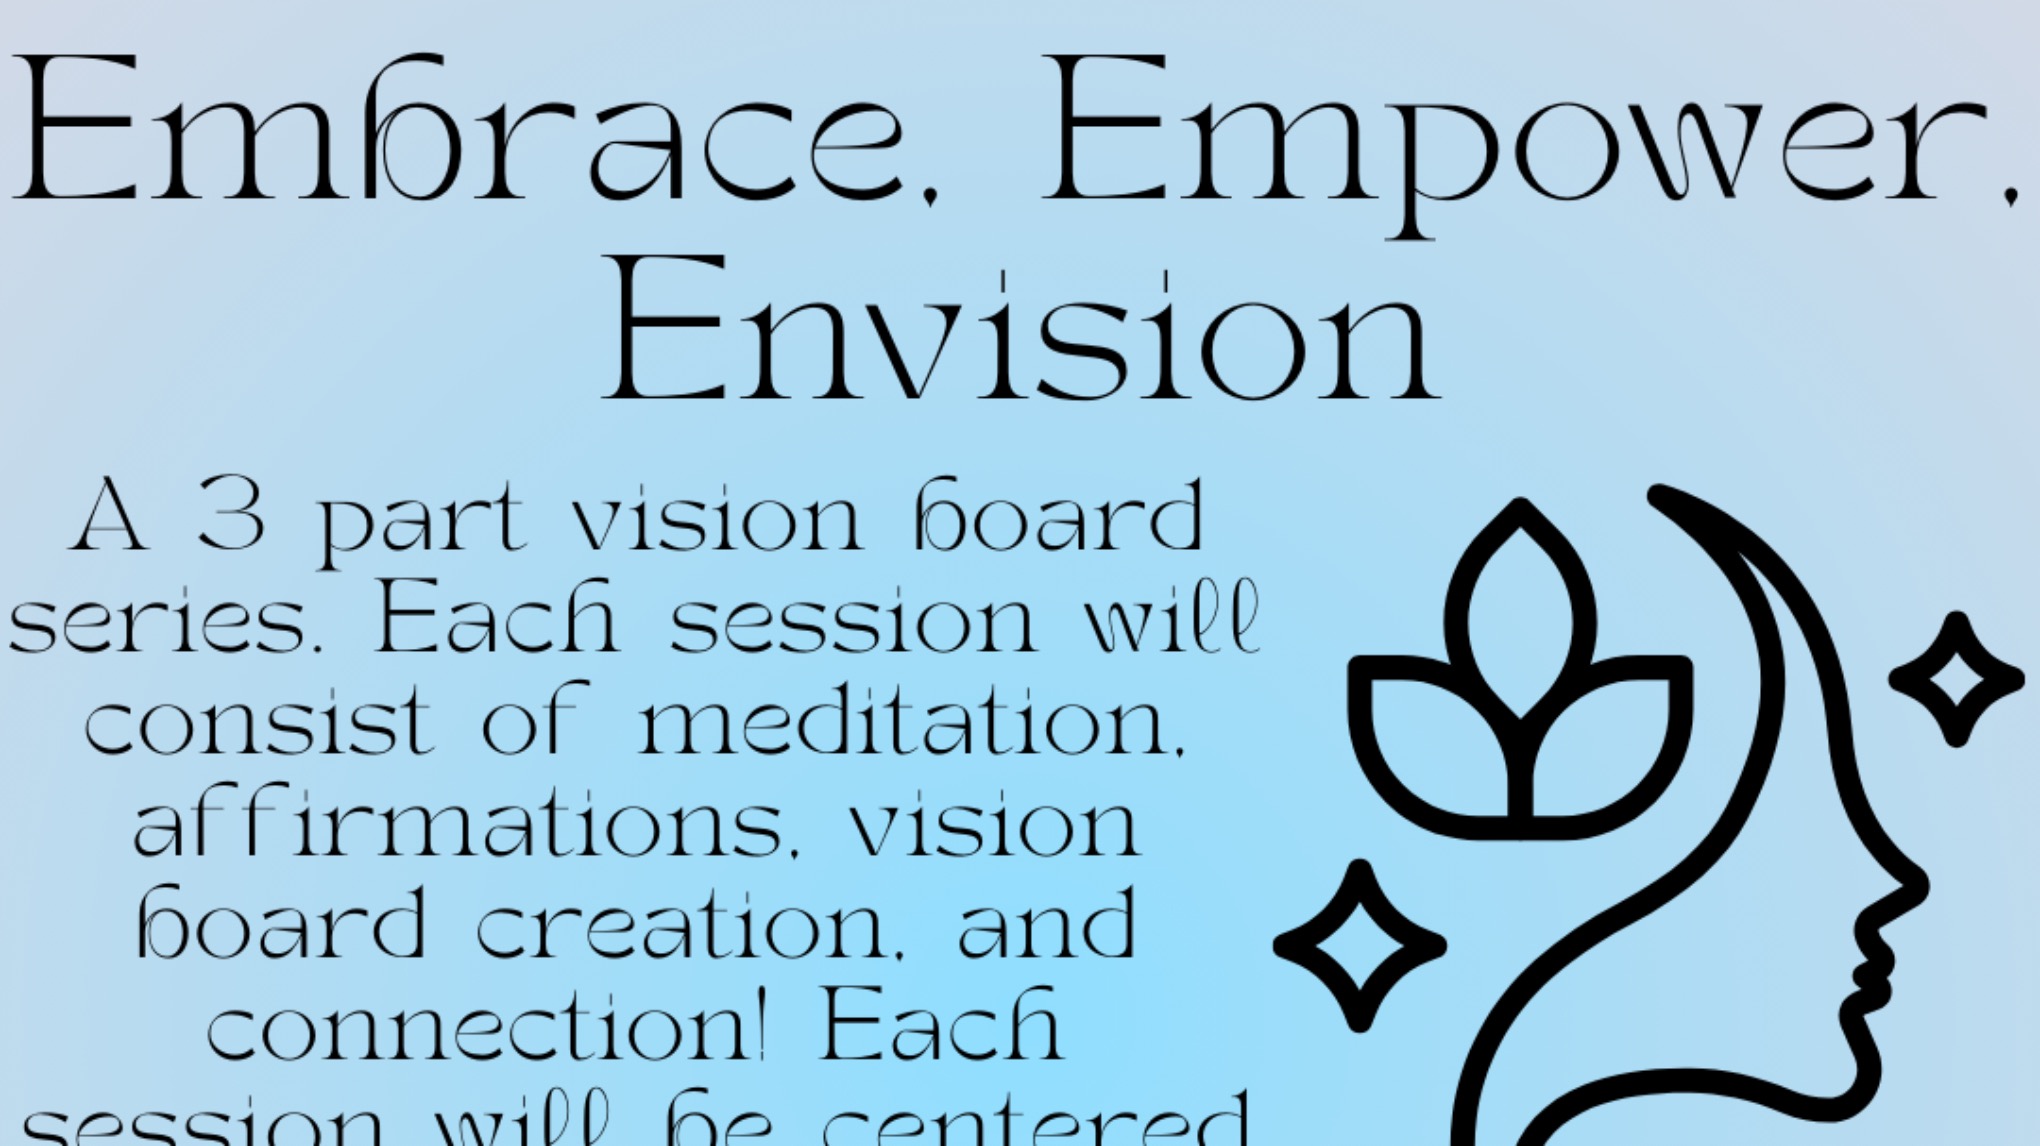 Embrace, Empower, Envision 2